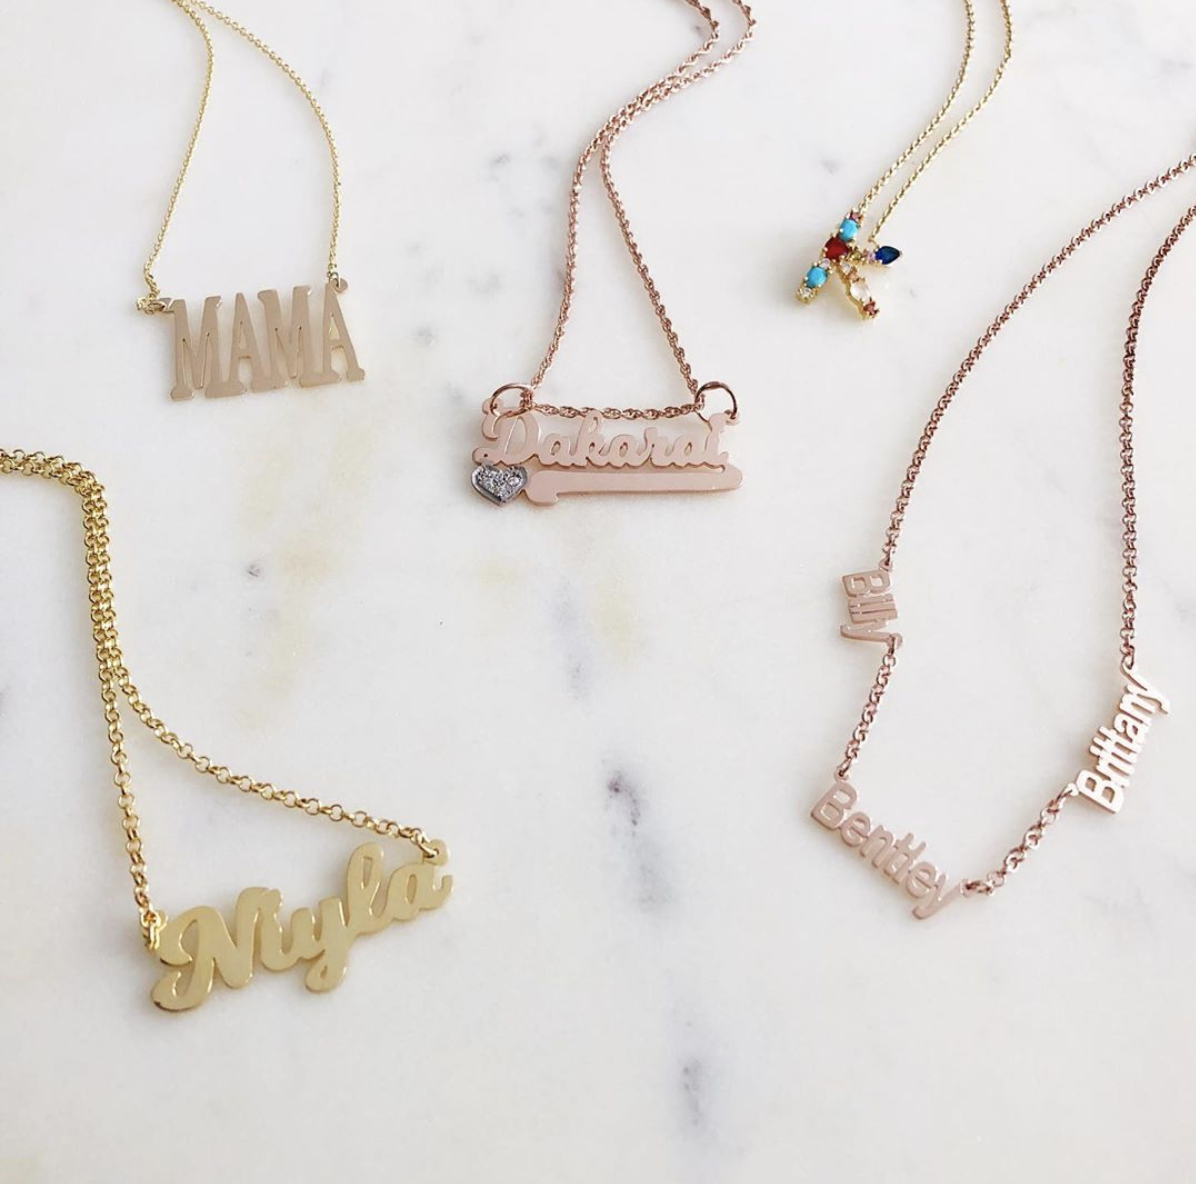 The Personalized Necklaces That Let You Carry Your Loved Ones With You